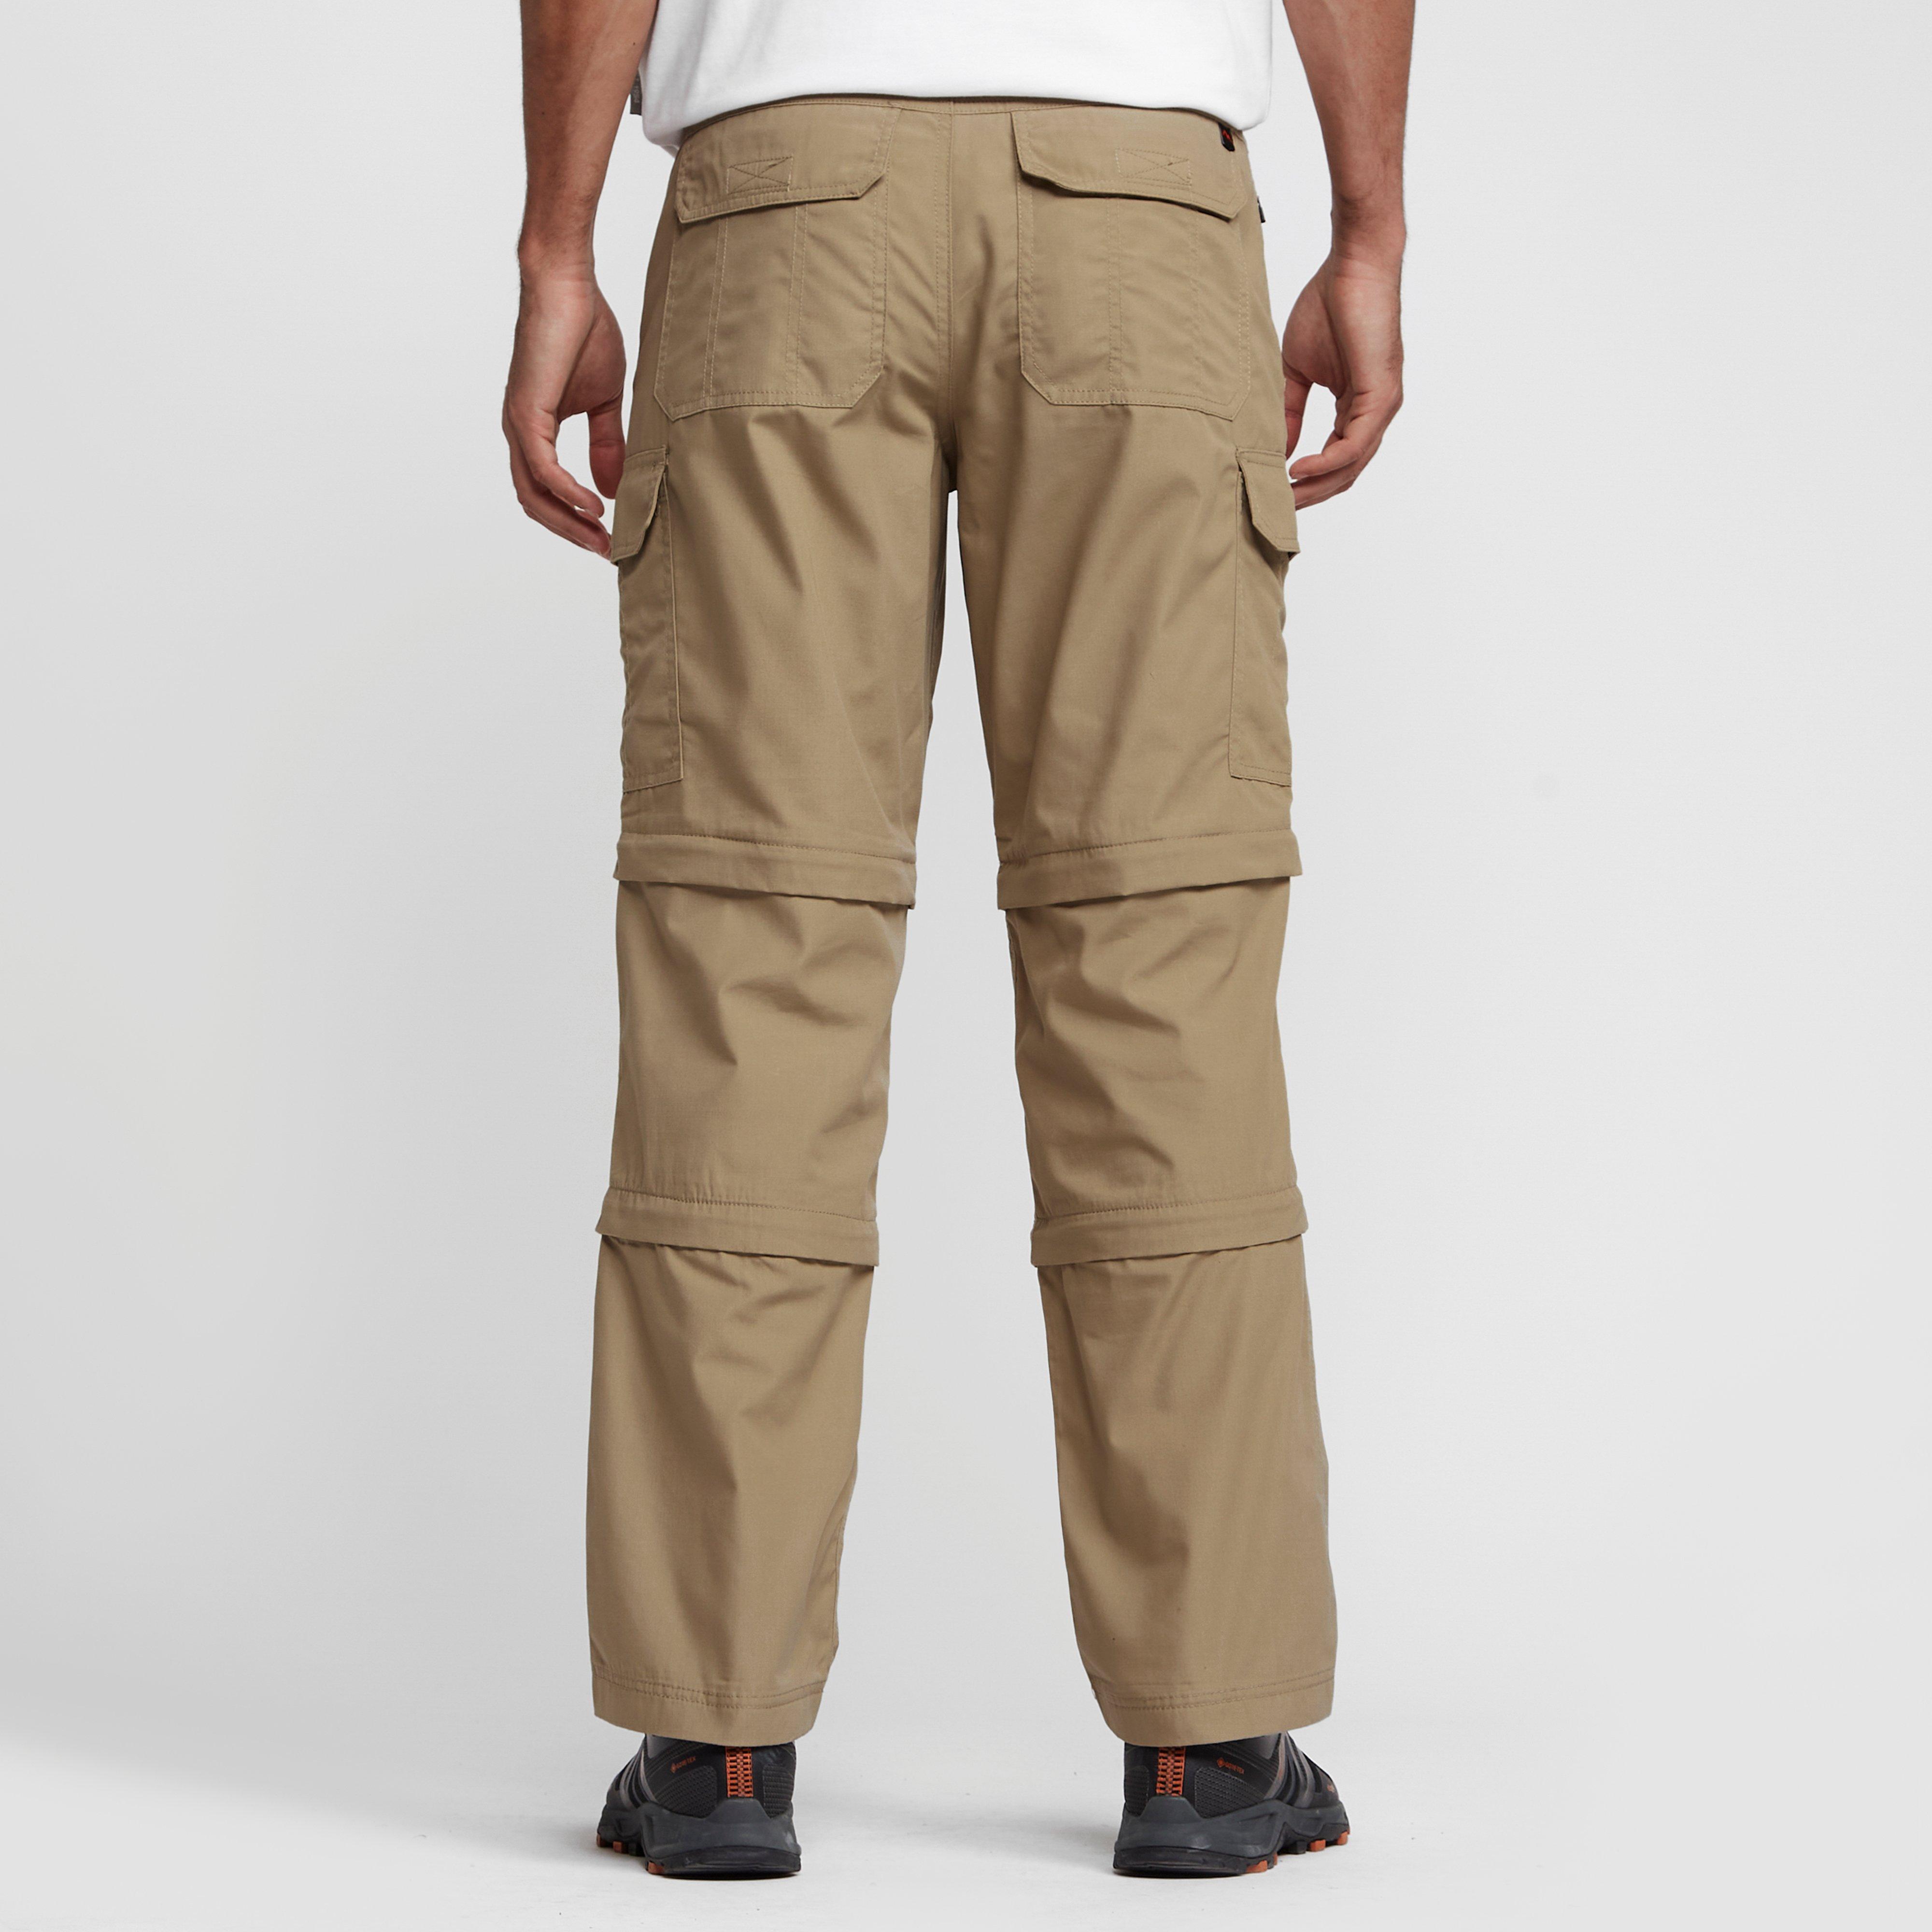 Peter Storm Mens' Ramble Double-zip Trousers Review